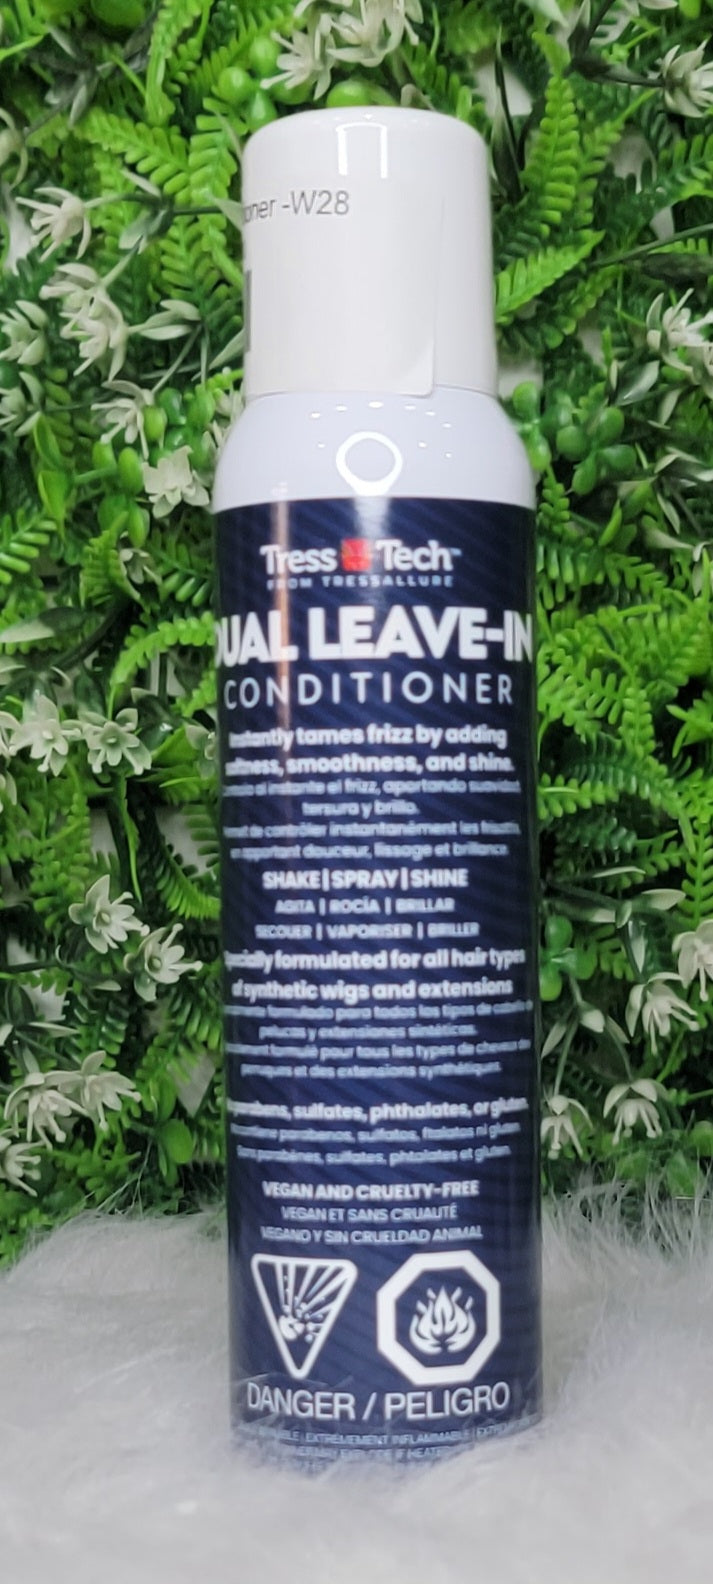 Dual Leave-in Conditioner -W28